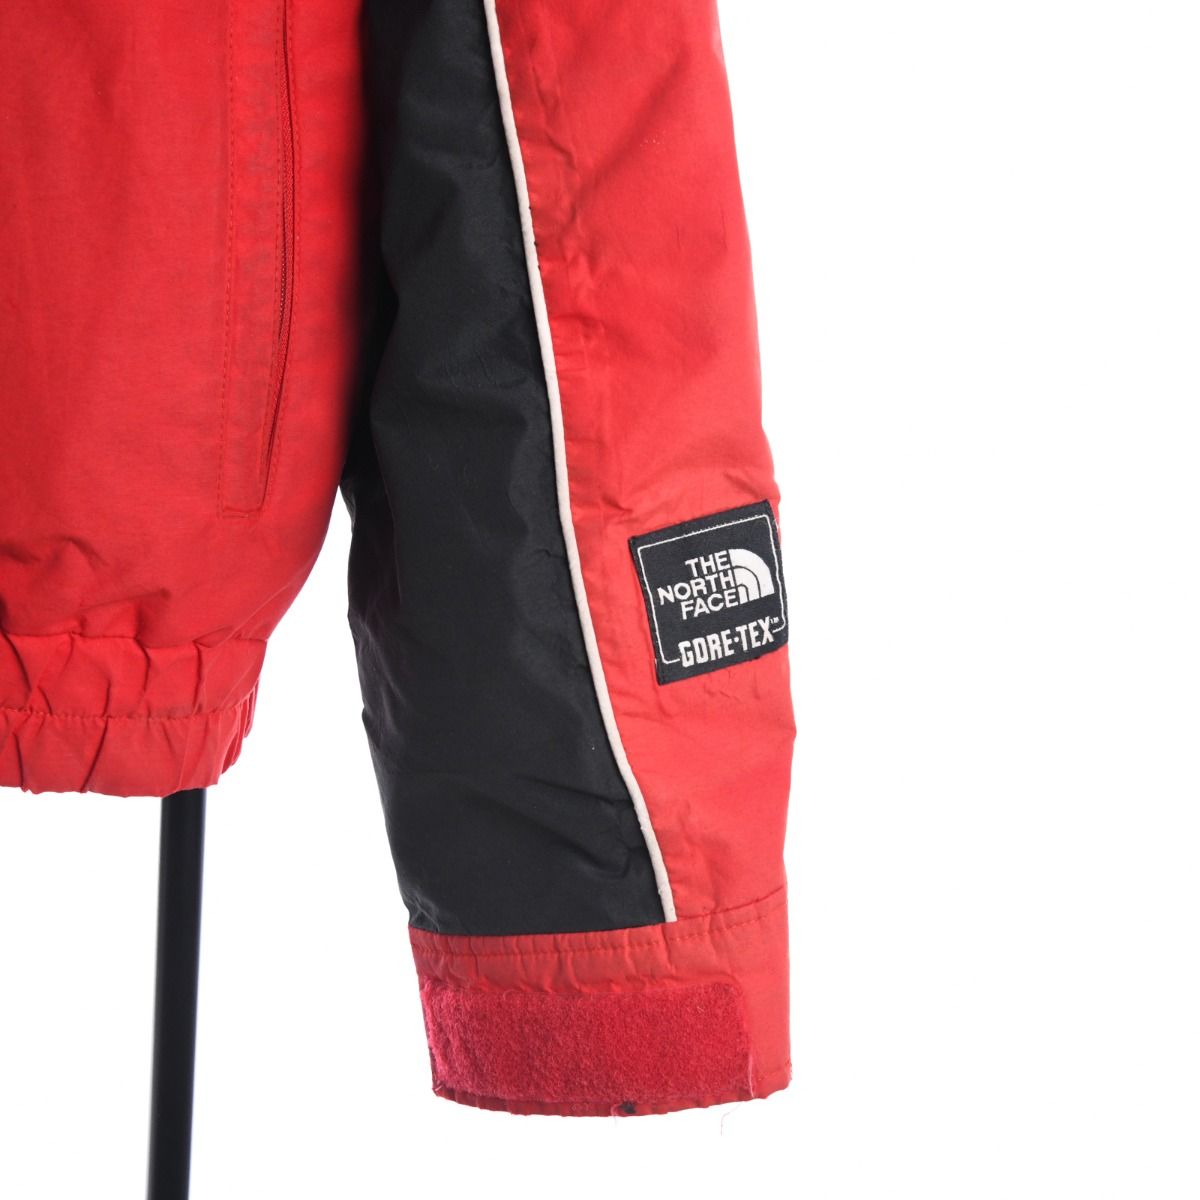 The North Face 1980s Gore-Tex Jacket